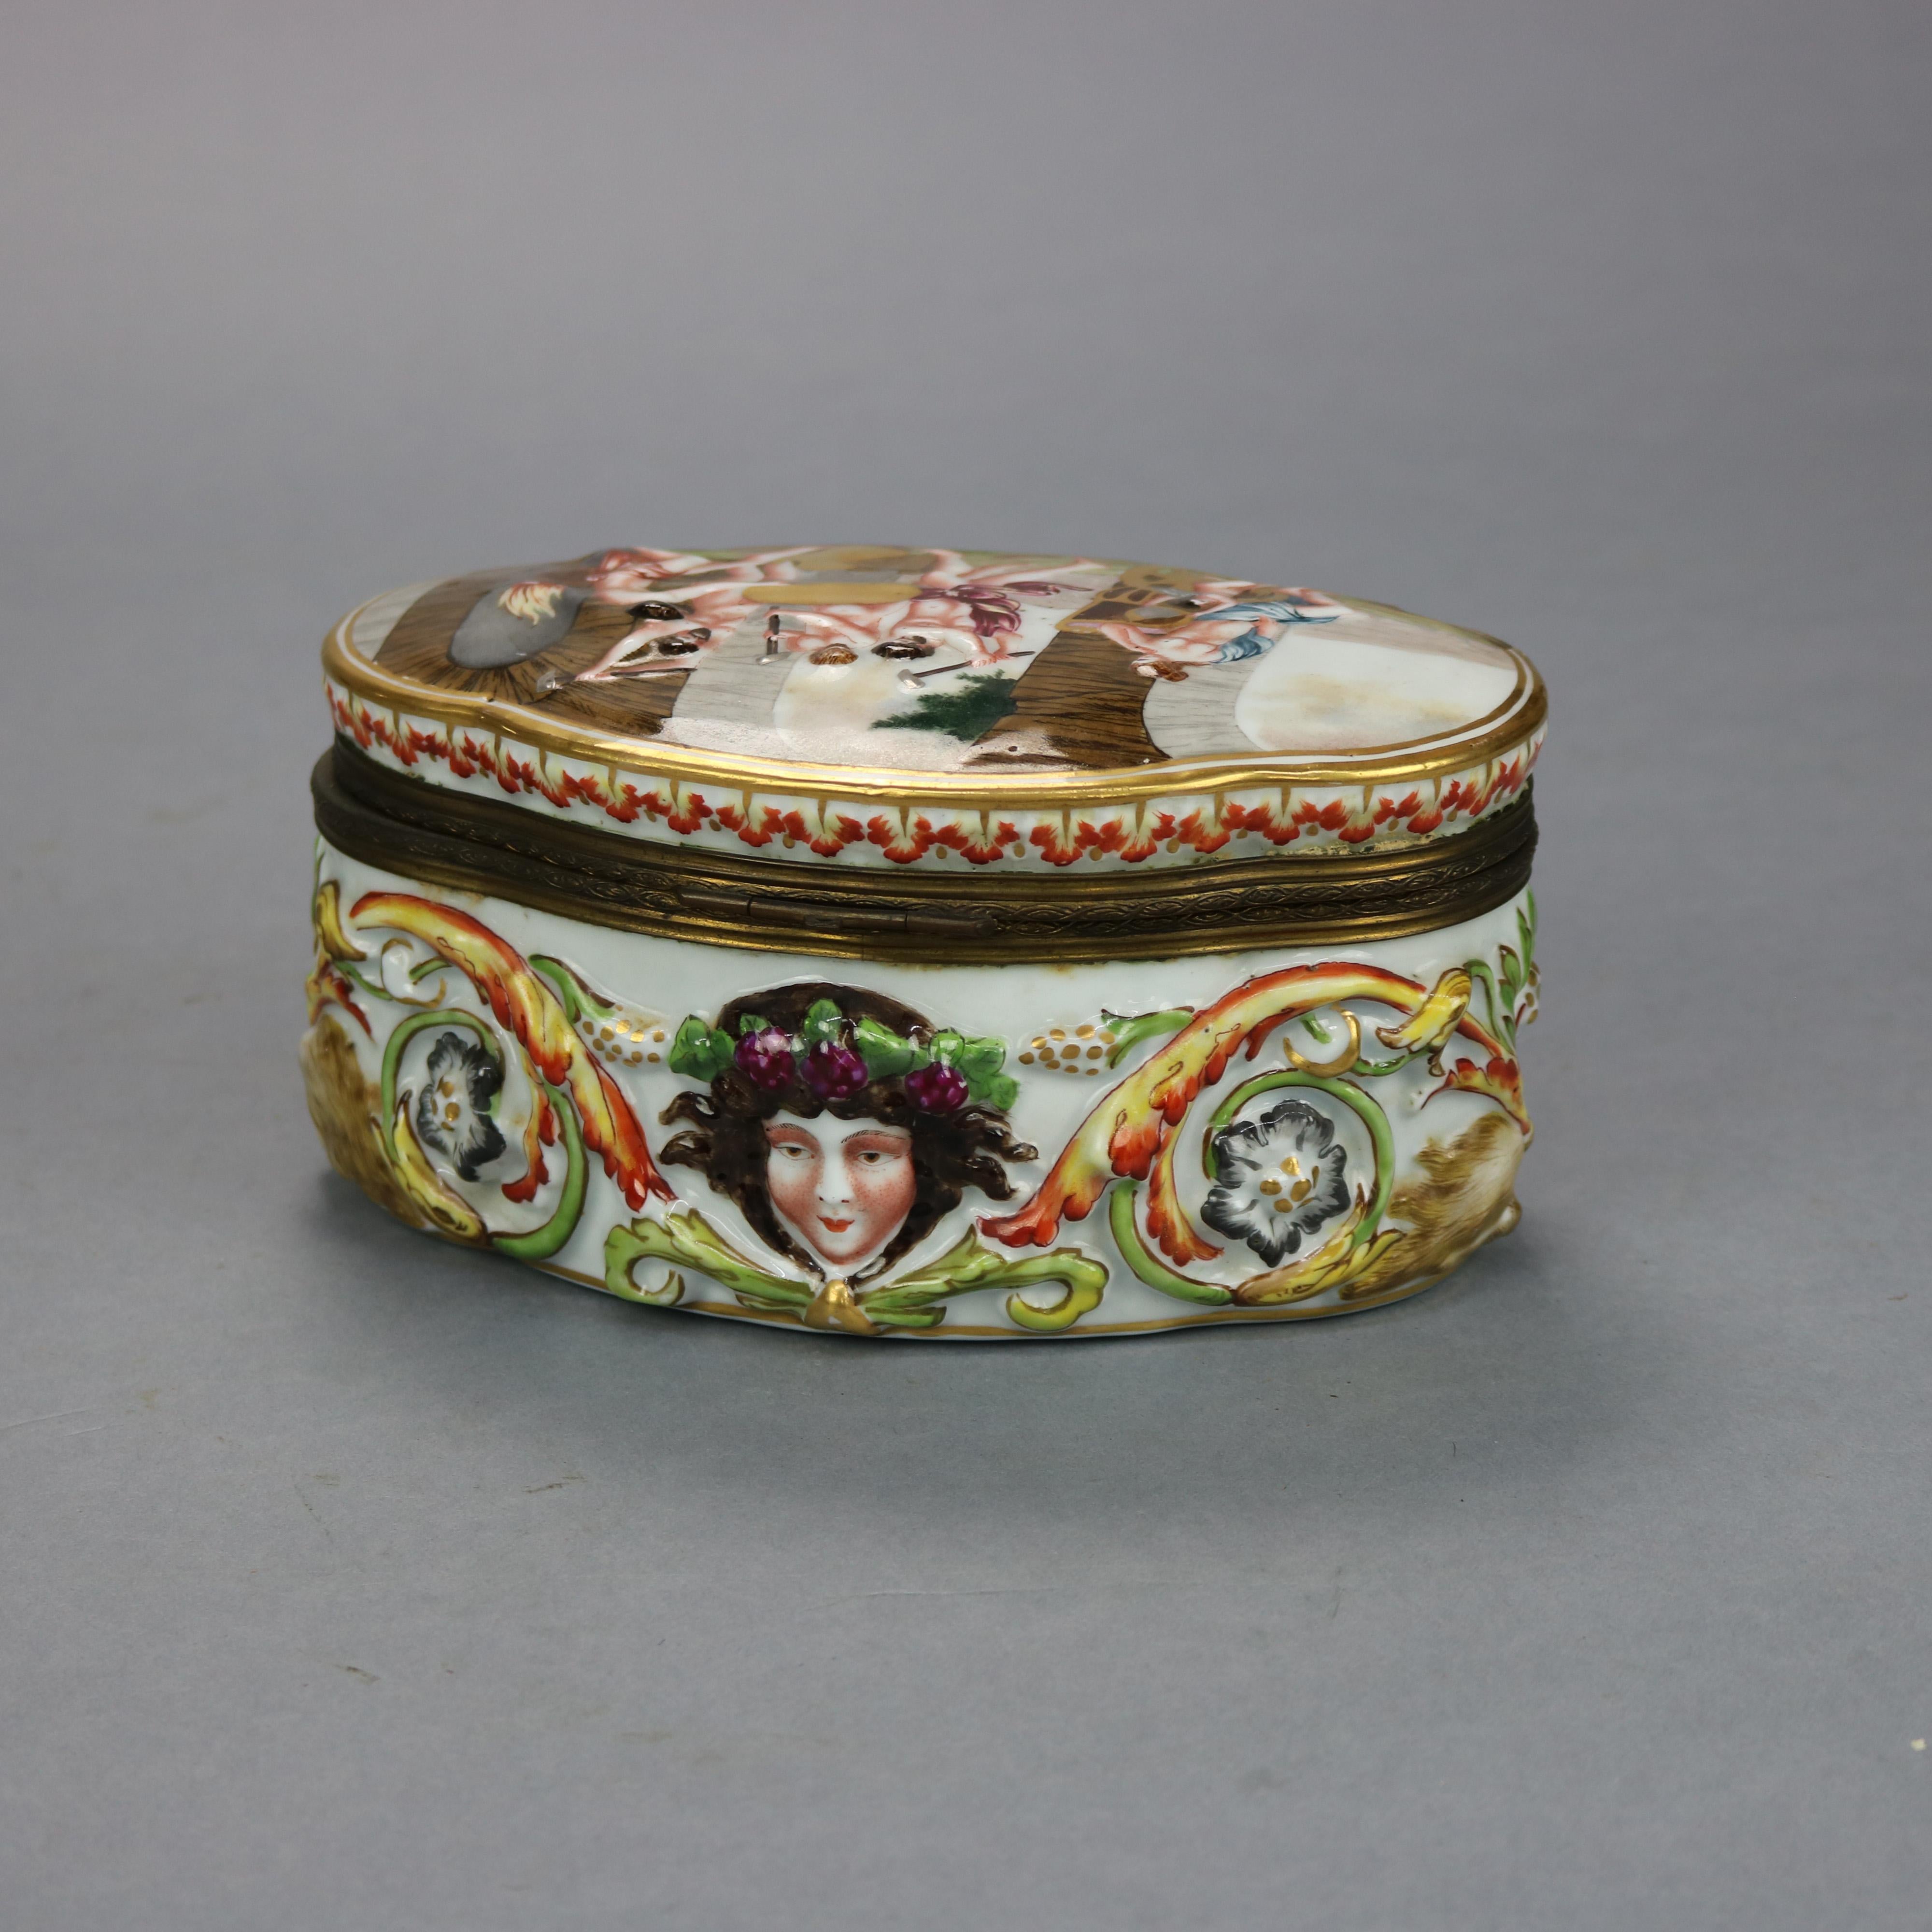 An antique Italian Capodimonte embossed dresser box offers lid with hand enameled and gilt classical scene with figures, decorated base with female mask and goats, blue crown 